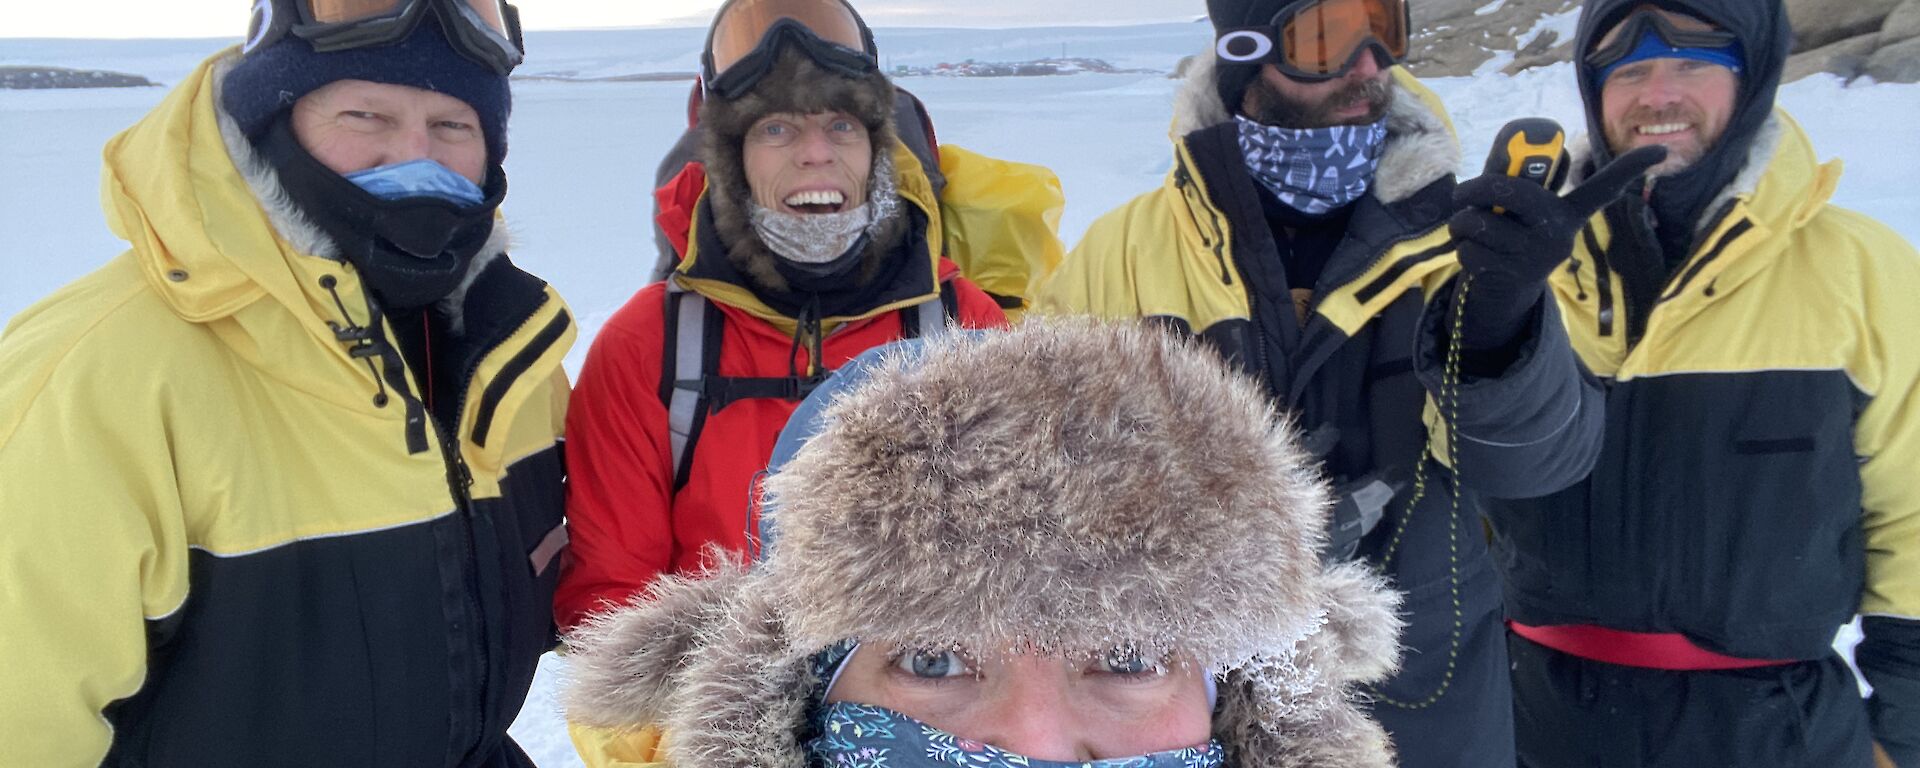 Five expeditioners dressed in their winter clothing gathered for a group photo.